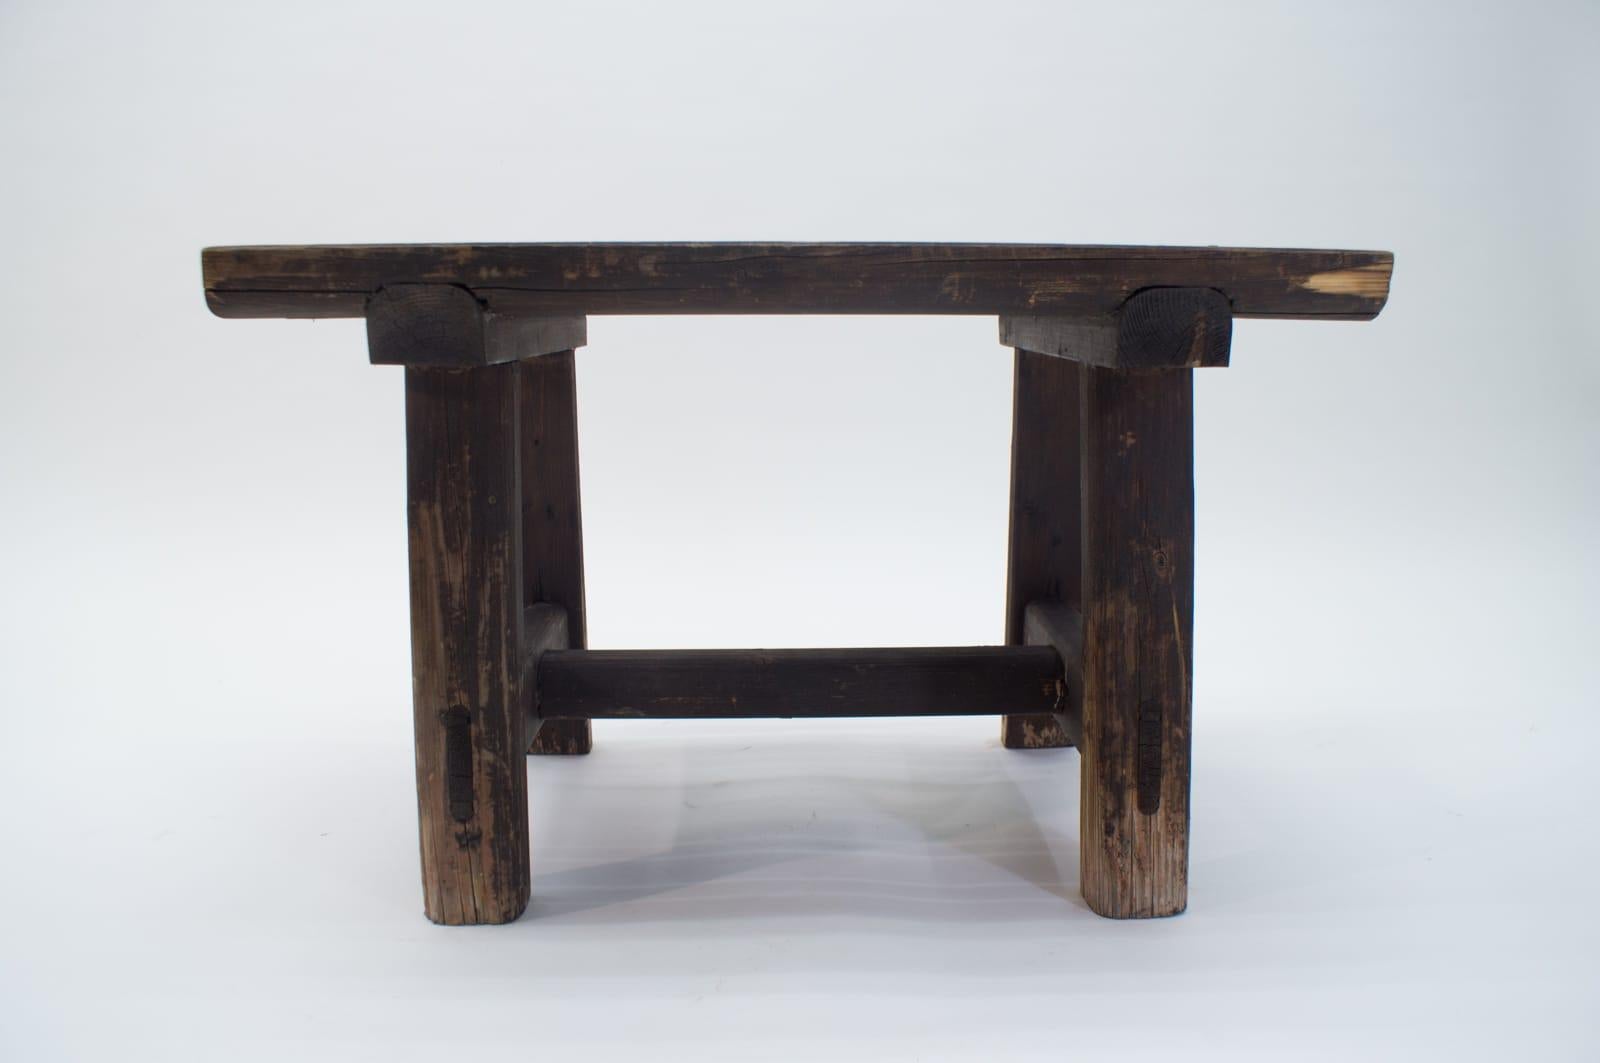 Black Forest Wooden Bench, 1930s-1940s Germany 1